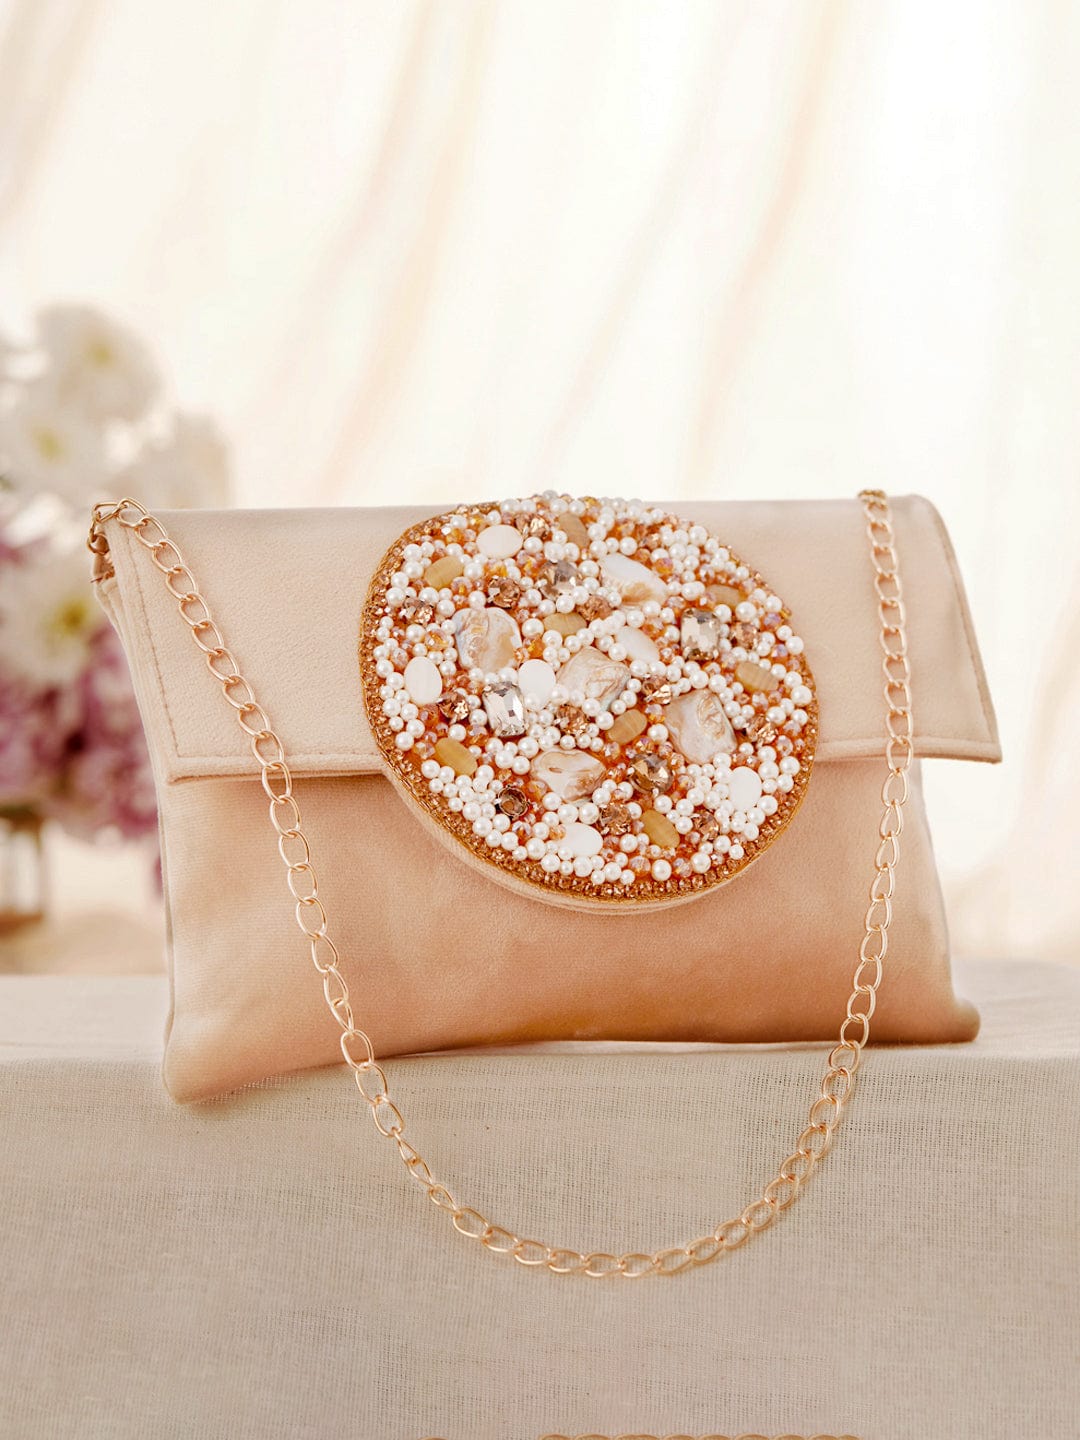 Rubans Off White Coloured Clutch Bag With Shells And Embroided White D